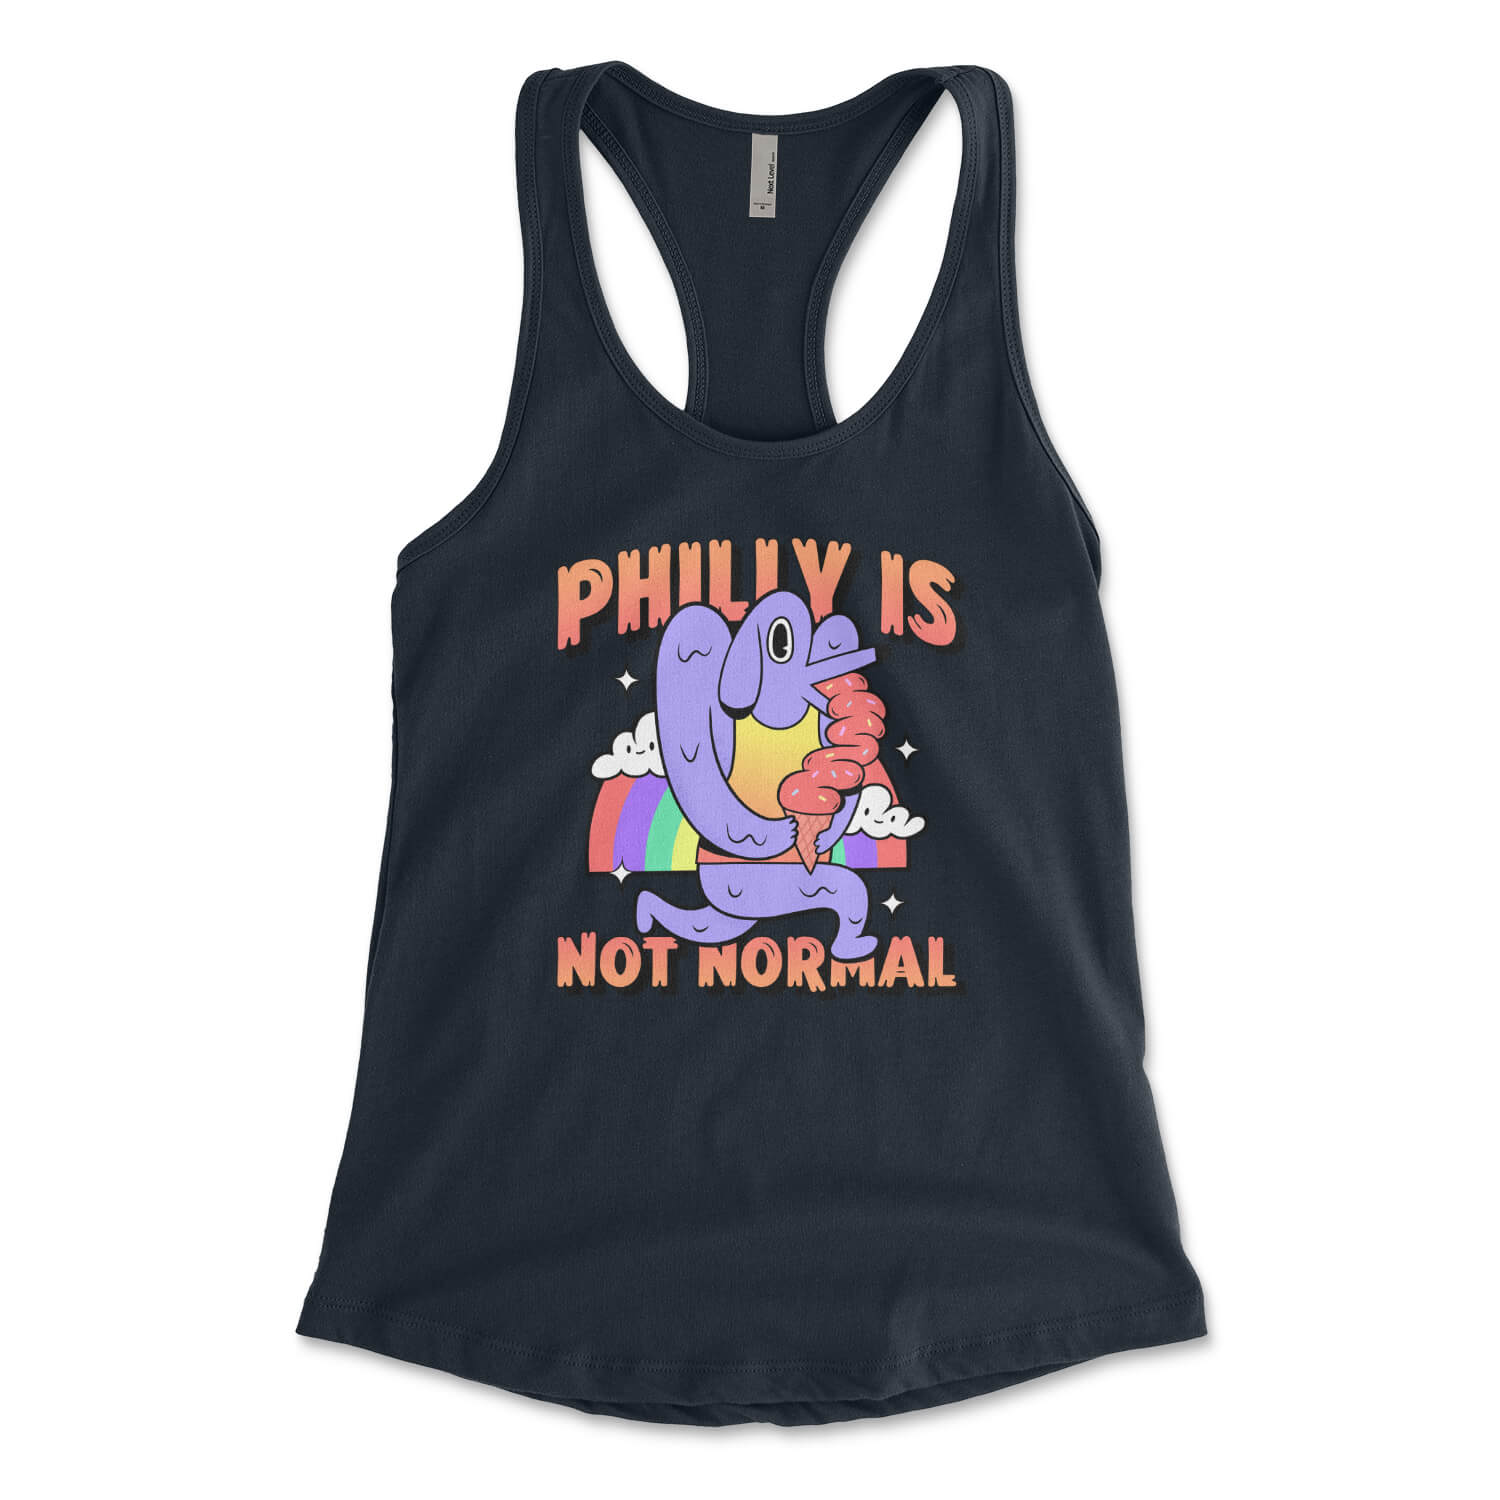 Philly is not normal dog licking ice cream in front of a rainbow design on a midnight navy blue womens racerback tank top from Phillygoat